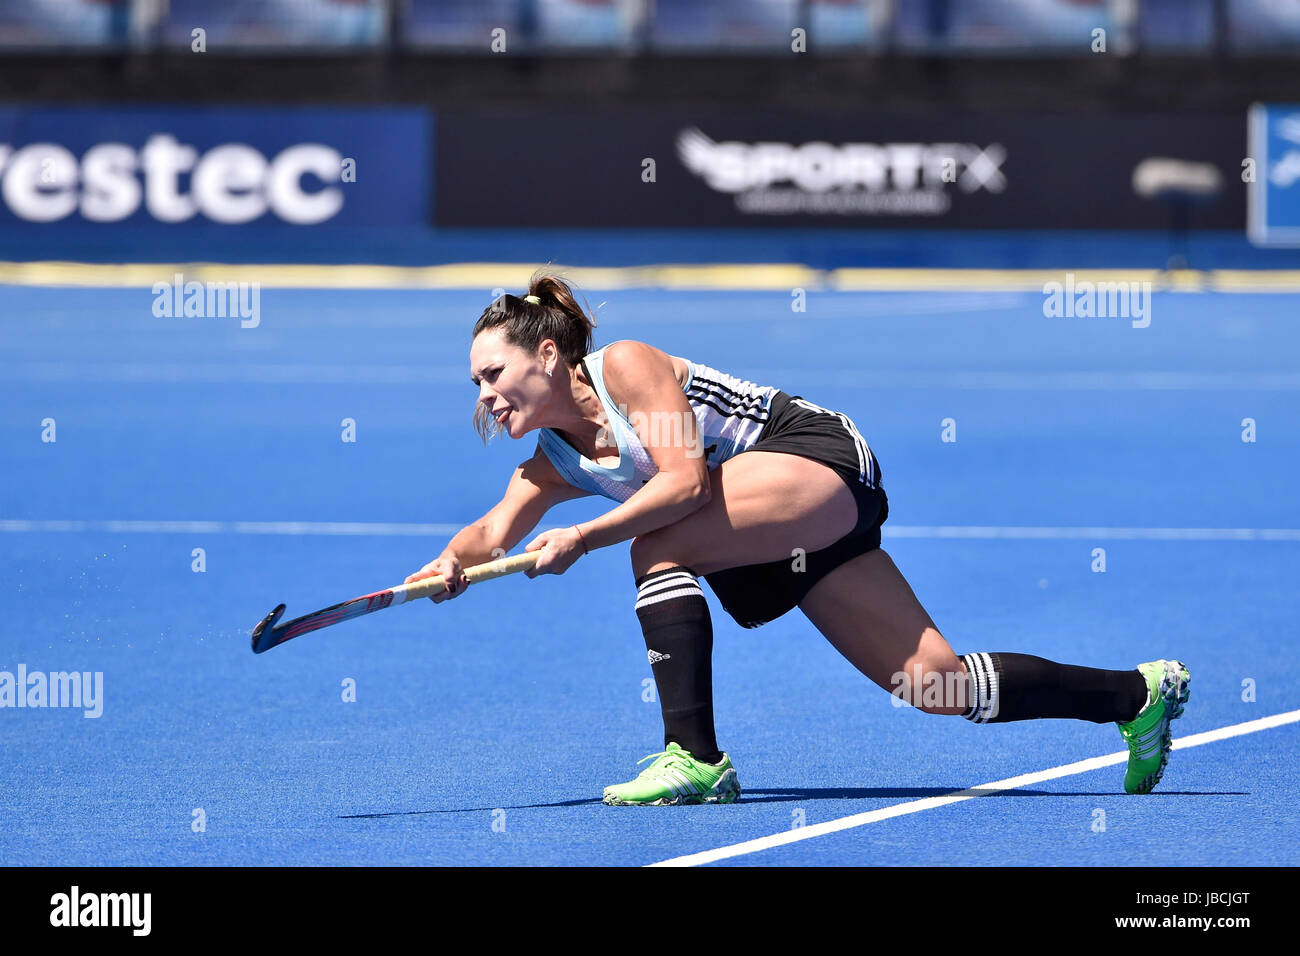 LONDON ENGLAND - June 10, 2017: Noel Barrionuevo in action during 2017 Investec International Women's Hockey England v. Argentina on Saturday at Lee Valley Hockey and Tennis Centre. Photo : Taka G Wu Stock Photo